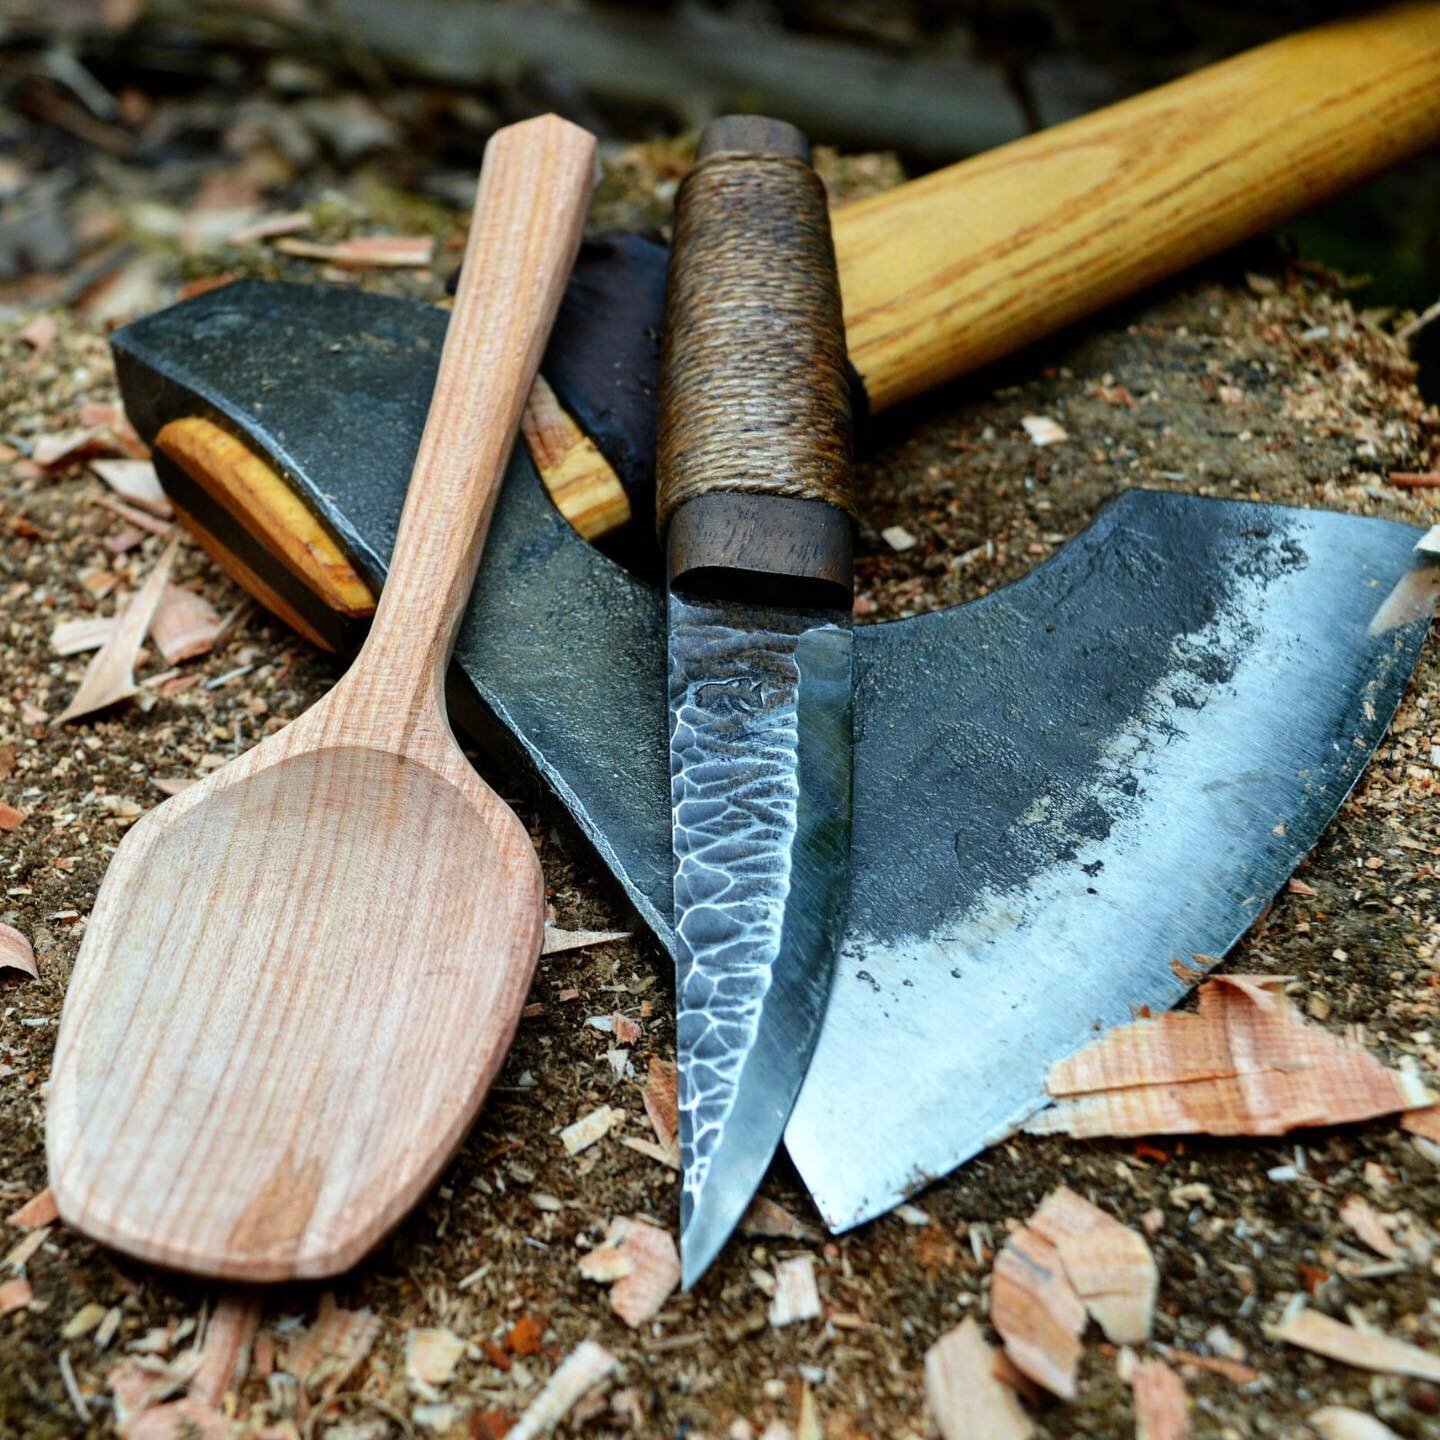 ** NEW ** SPOON CARVING WORKSHOPS at Badgells Wood!

A highly enjoyable and practical course with @backgardenbushcraft designed to give novice or new carvers a comprehensive introduction to the craft. 

Courses run from 10 am to 4pm on:

Saturday 7 M